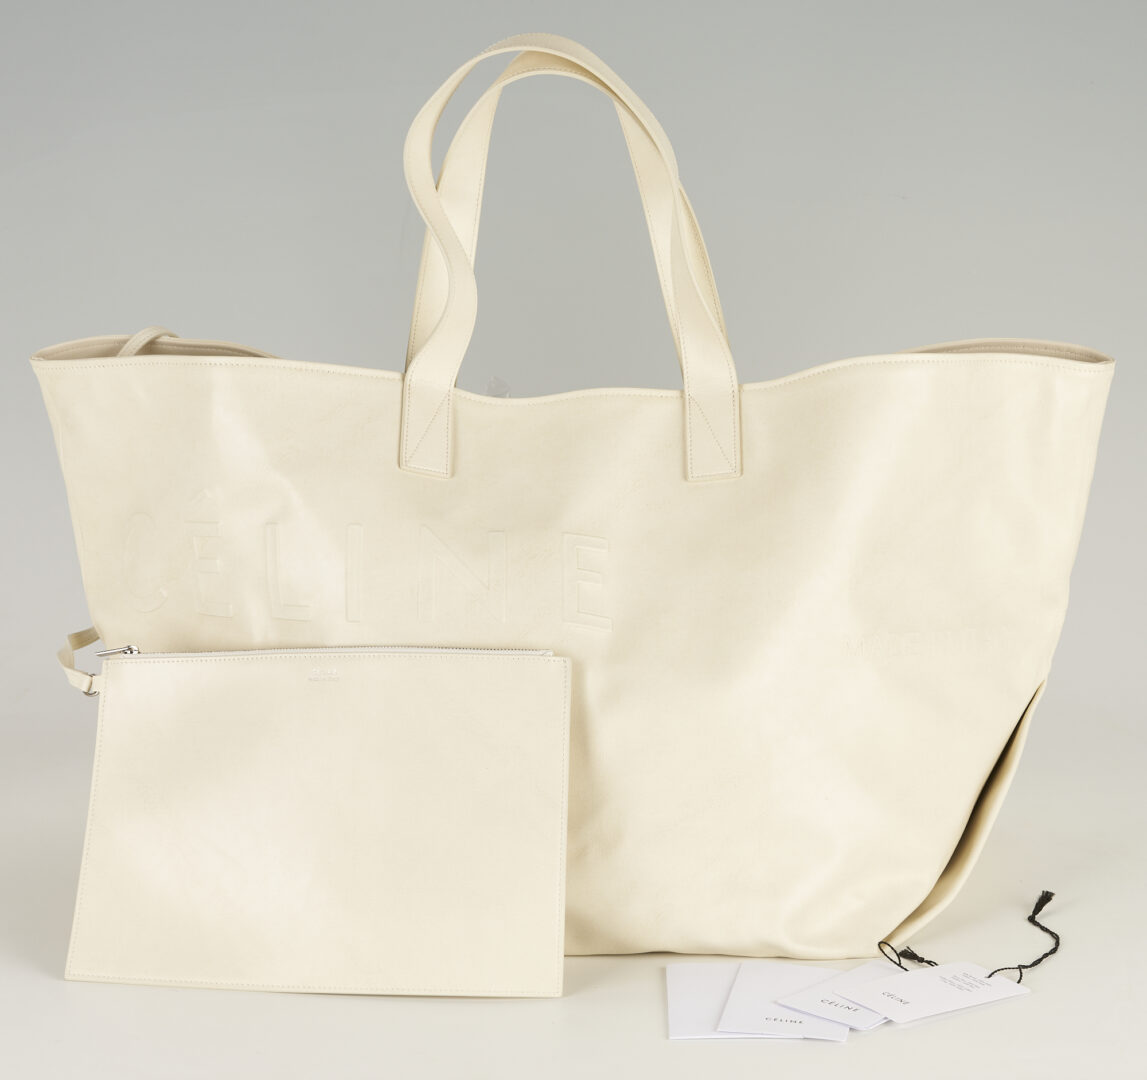 Lot 794: Celine "Made In" Medium White Leather Tote Bag